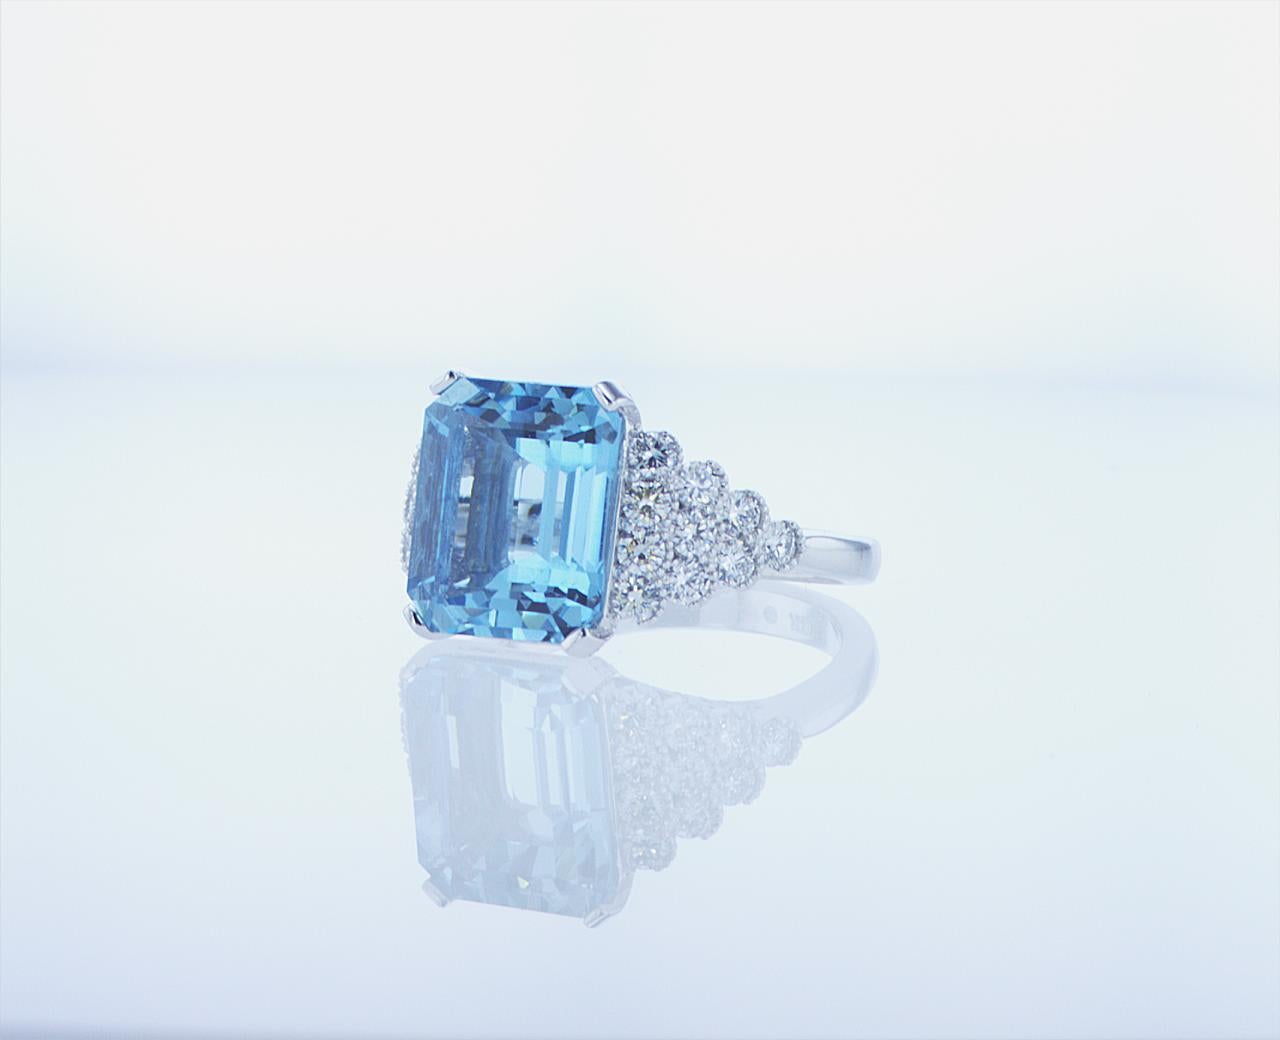 5.40ct Emerald Cut Aqua Ring featuring 1.05ct Total Weight of G/H Color, VS Clarity Round Brilliant Diamonds in an 18k White Gold with Palladium Mounting.
